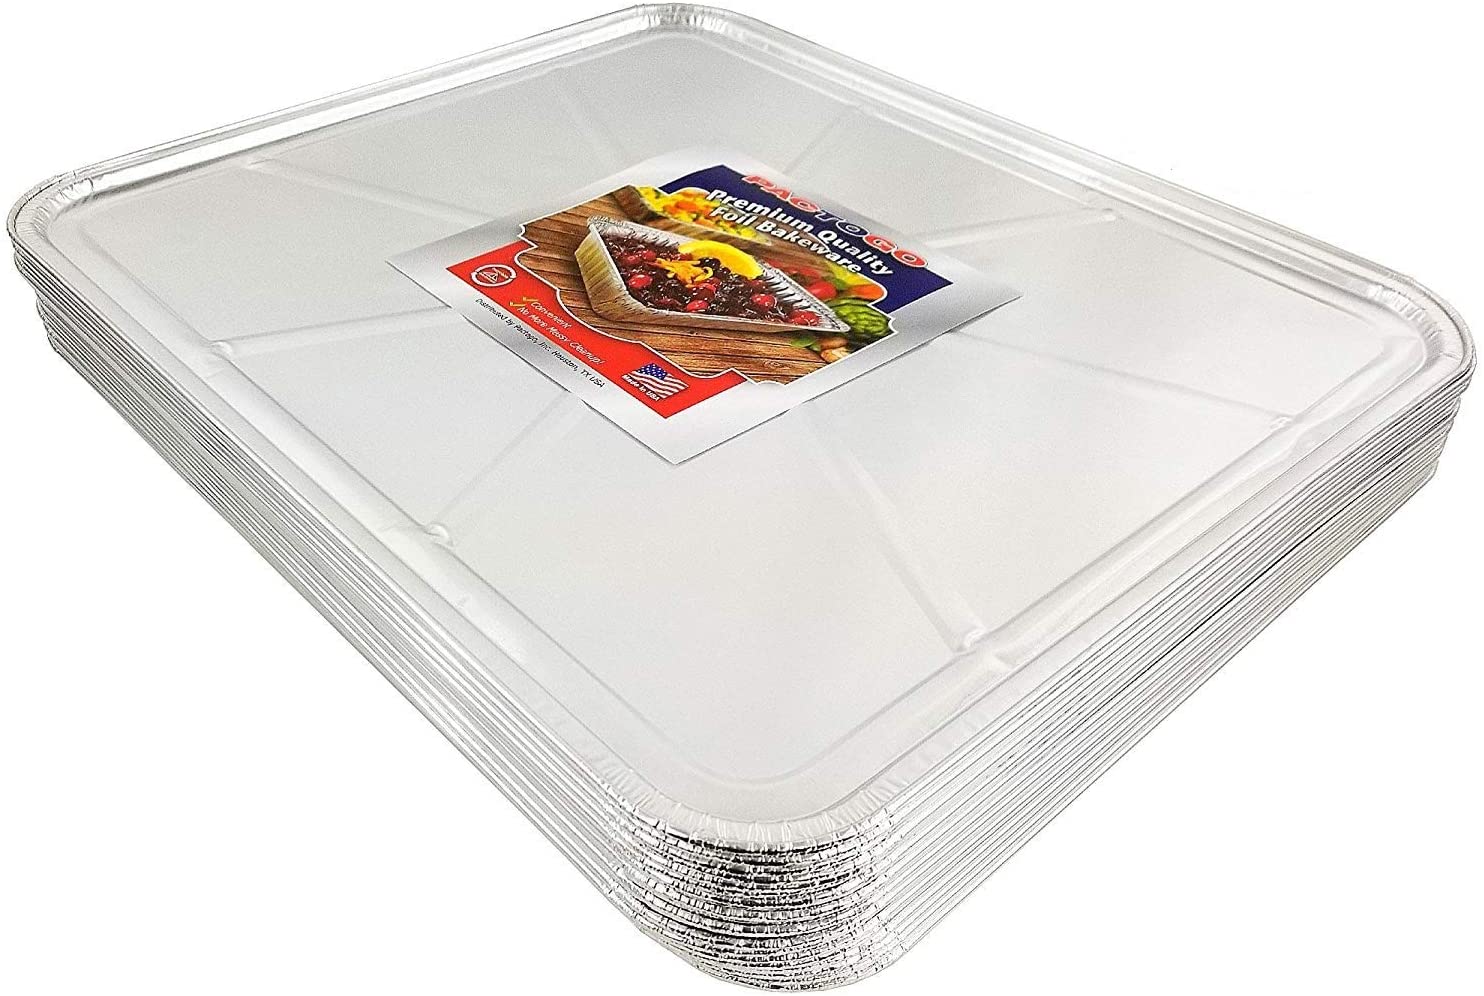 Disposable Foil Oven Liners (10 Pack) Oven Liners for Bottom of